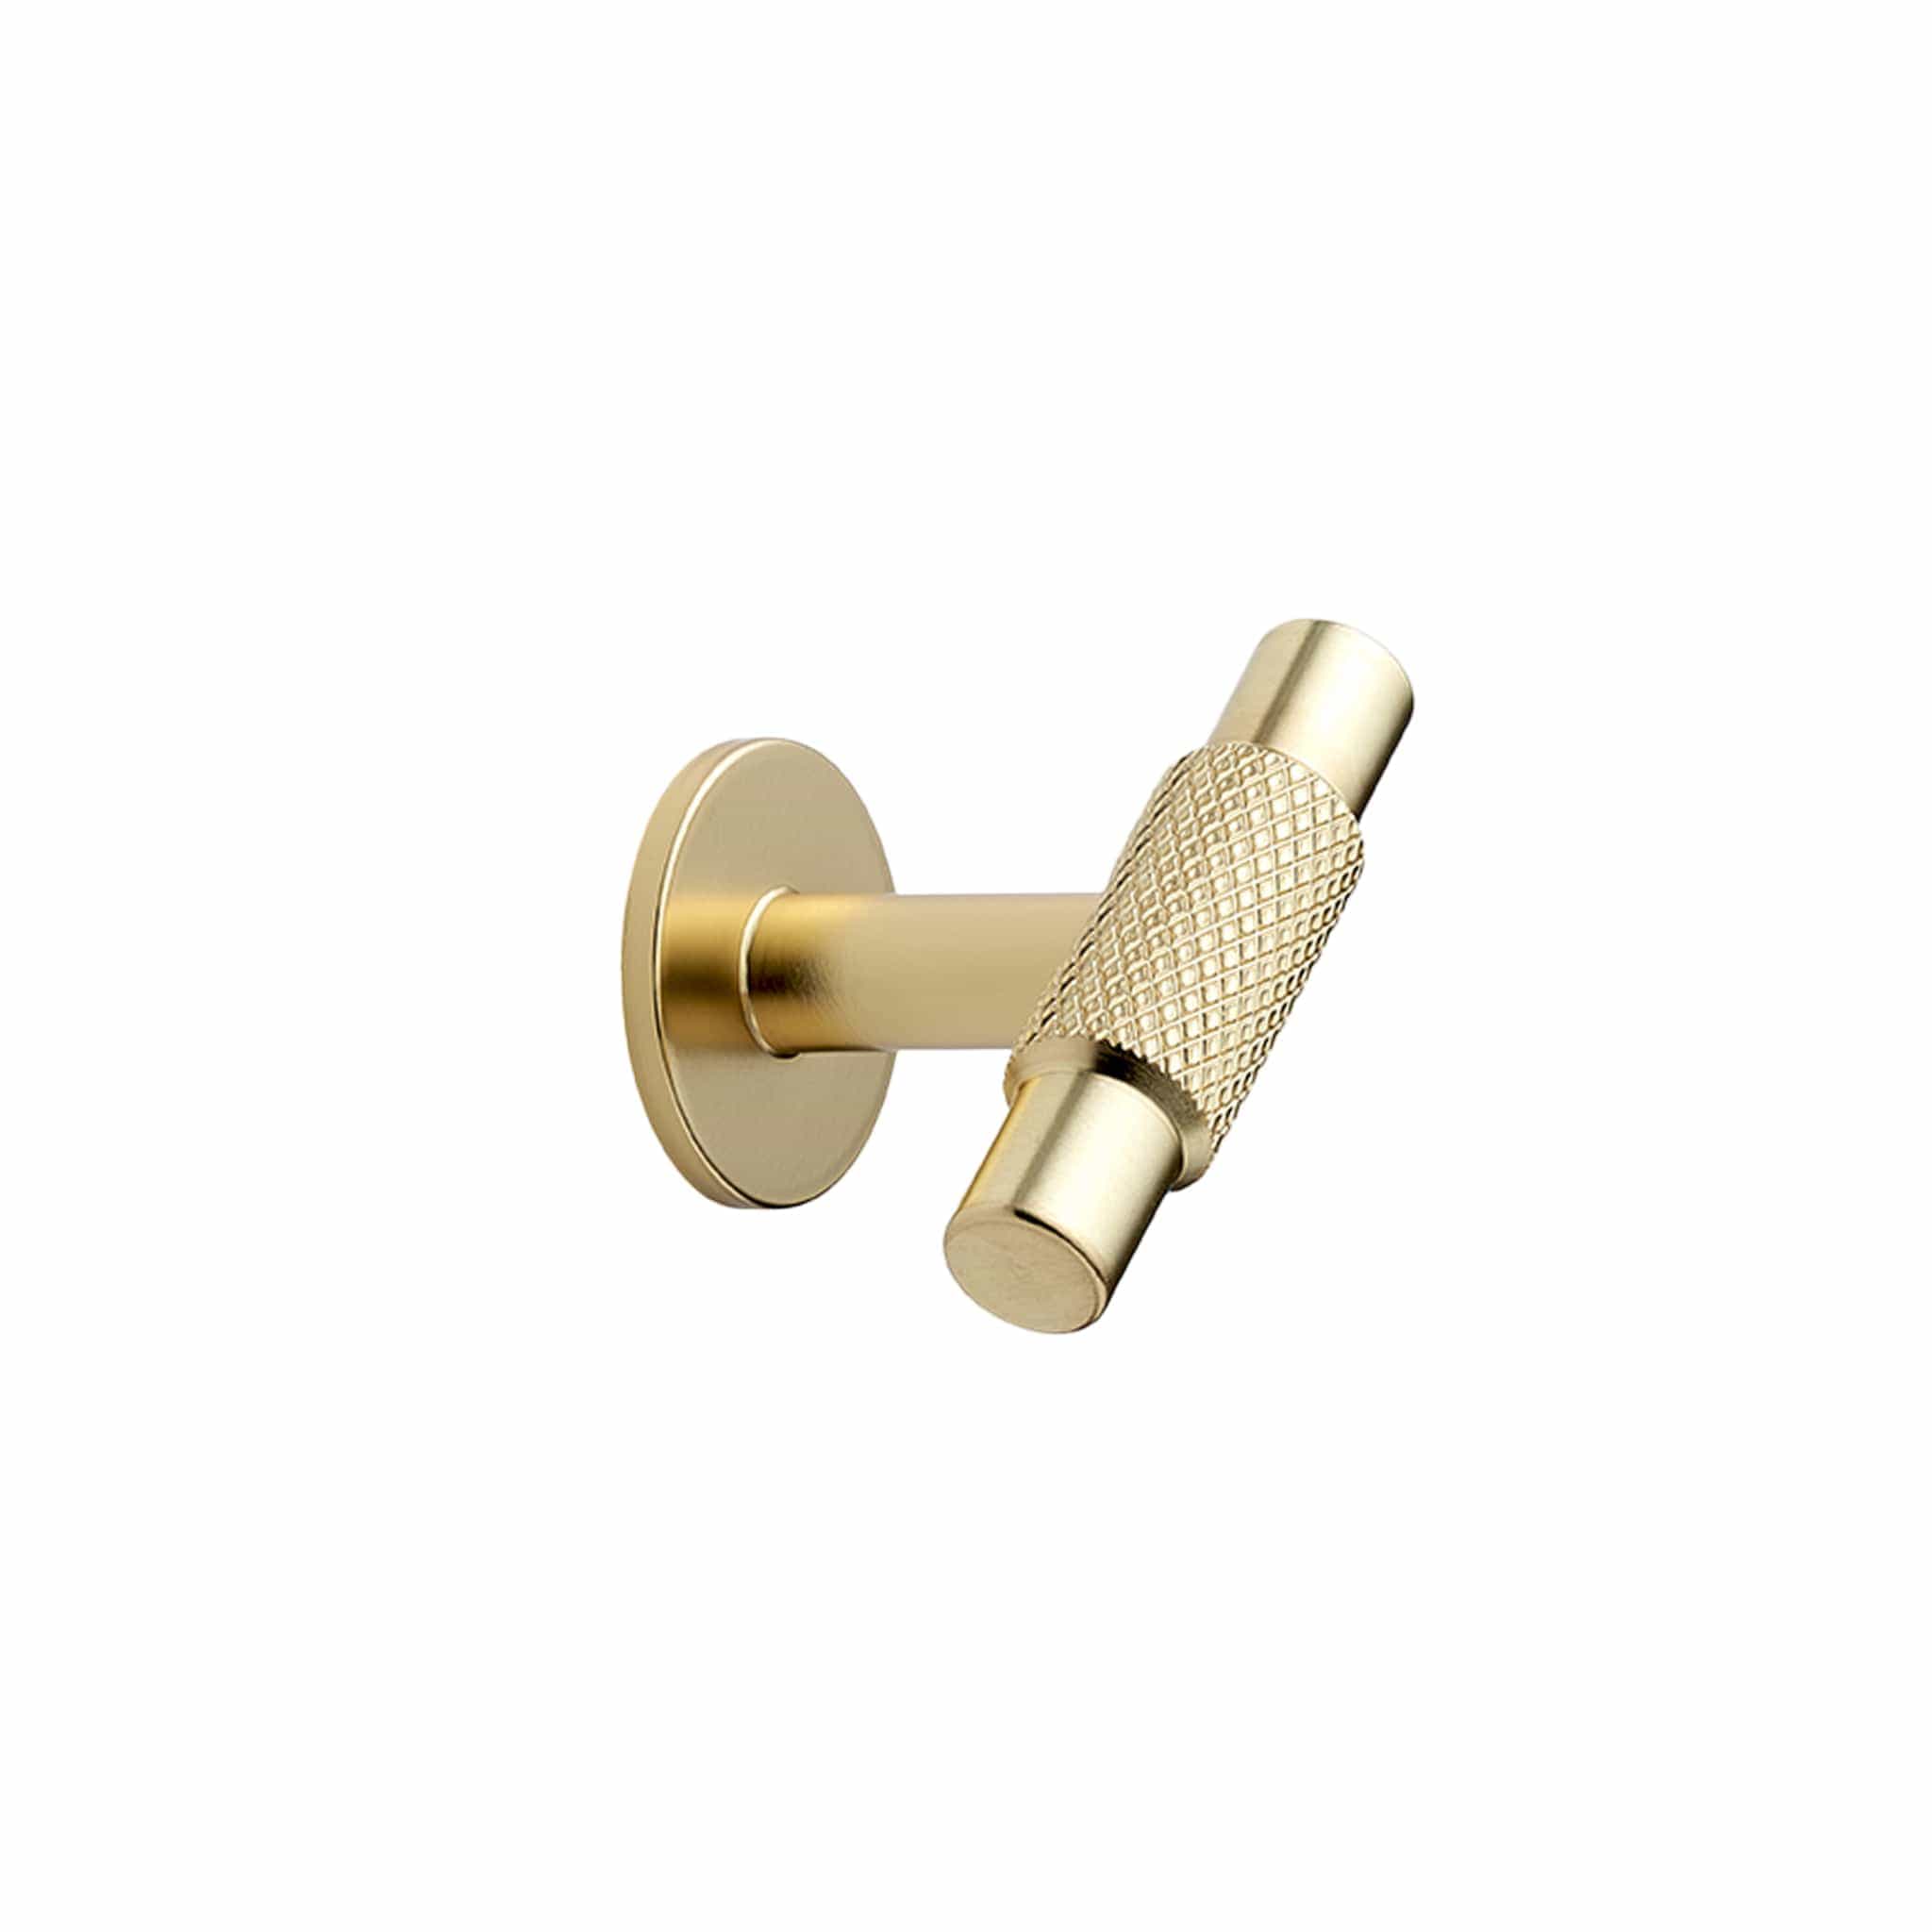 Manor T-Bar | Greb/Knop i Messing/Guld Finish med bagplade L 54 mm x D 39 mm Furnipart FP-549120054-34 FINICC